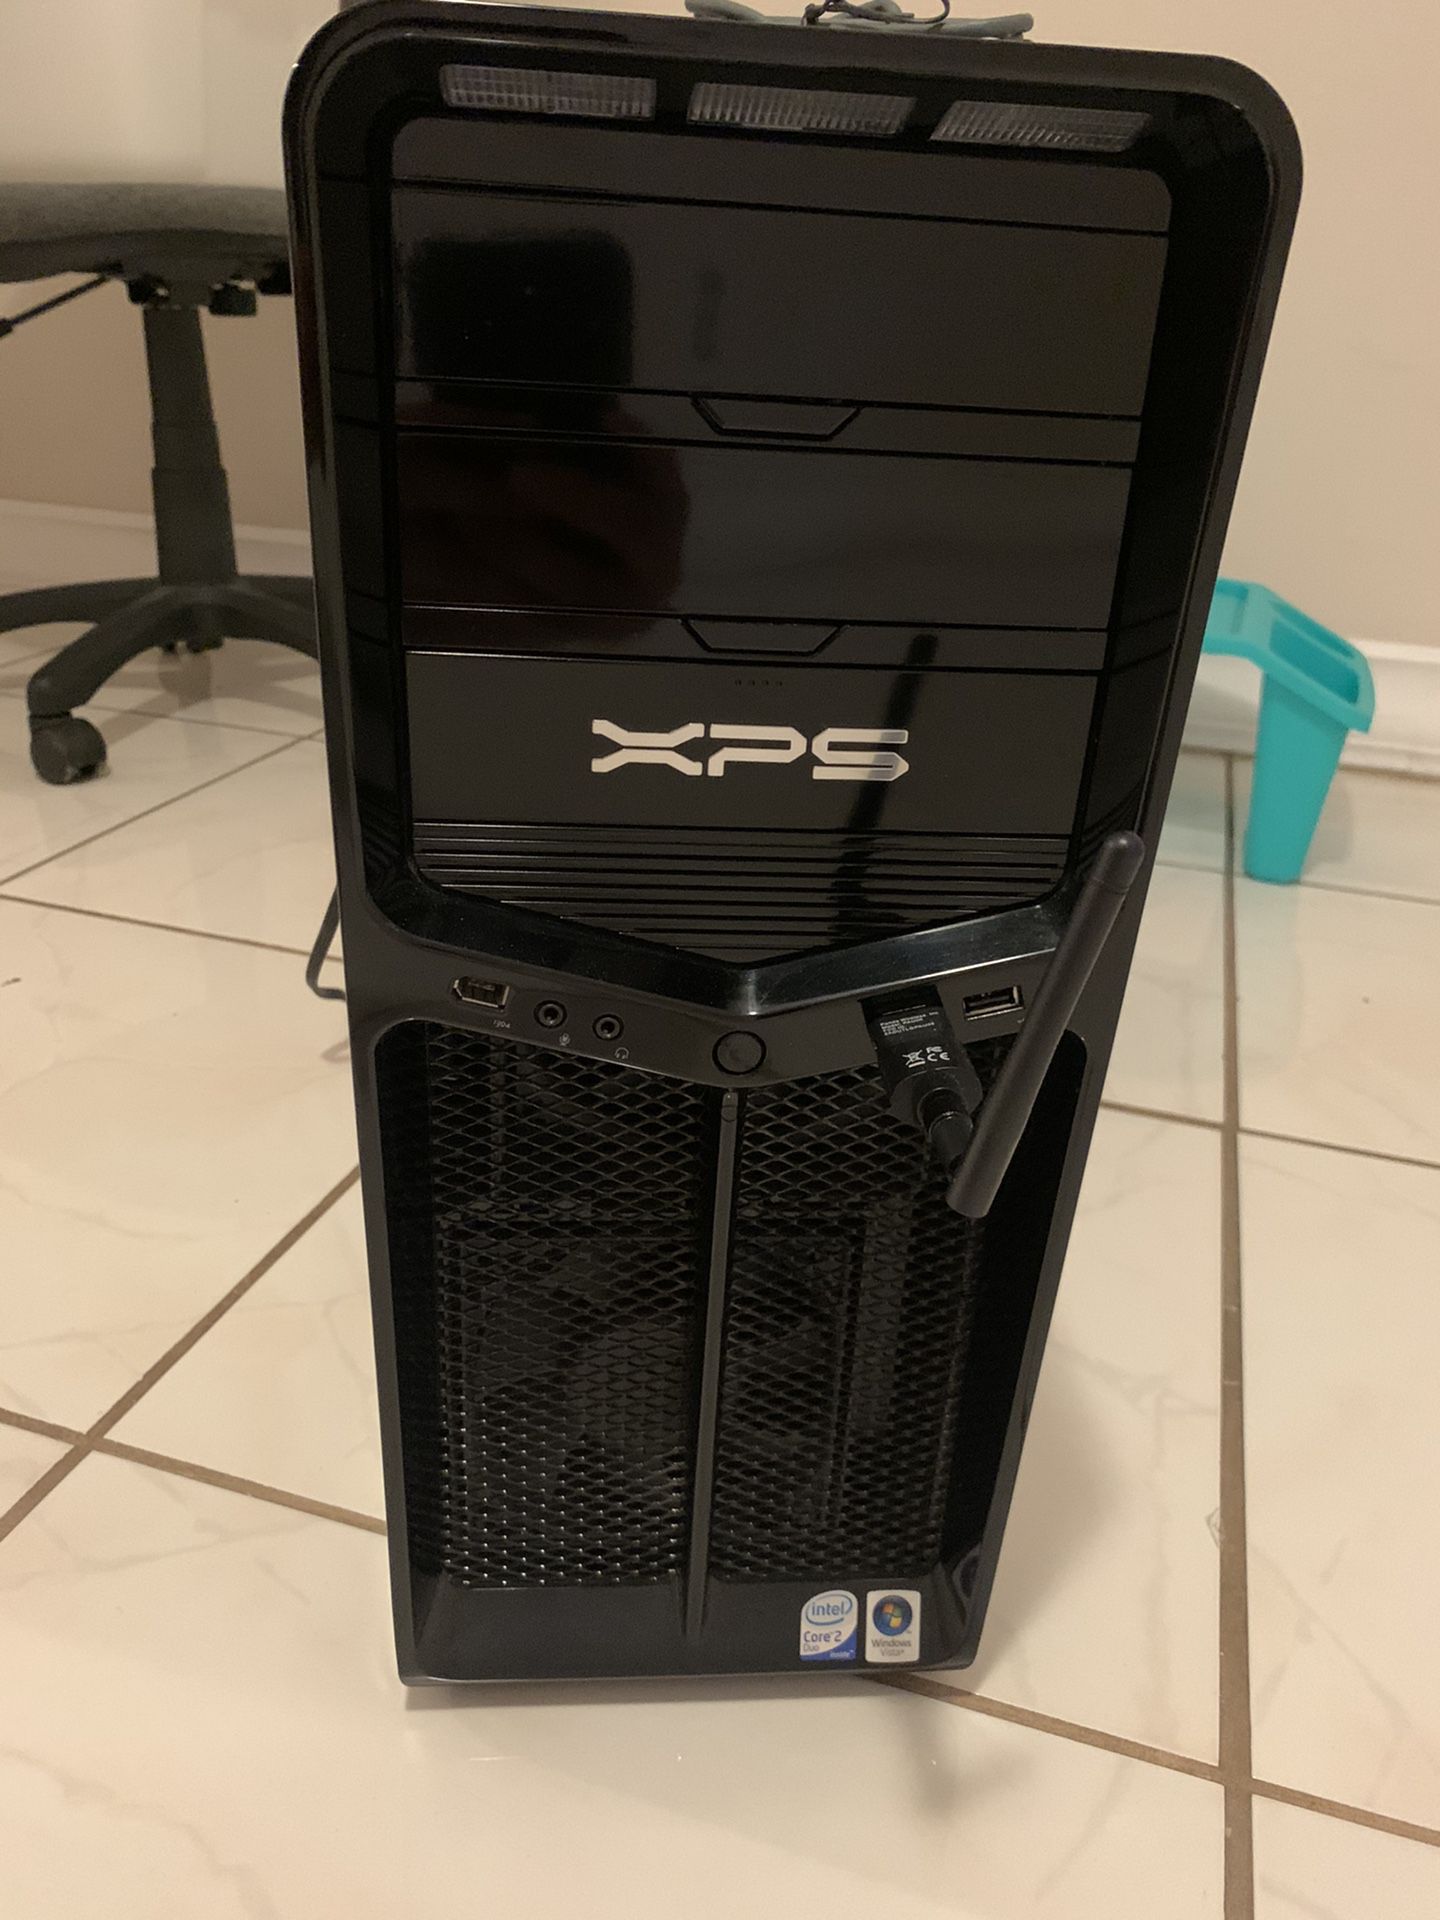 Sell XPS 630i gaming pc